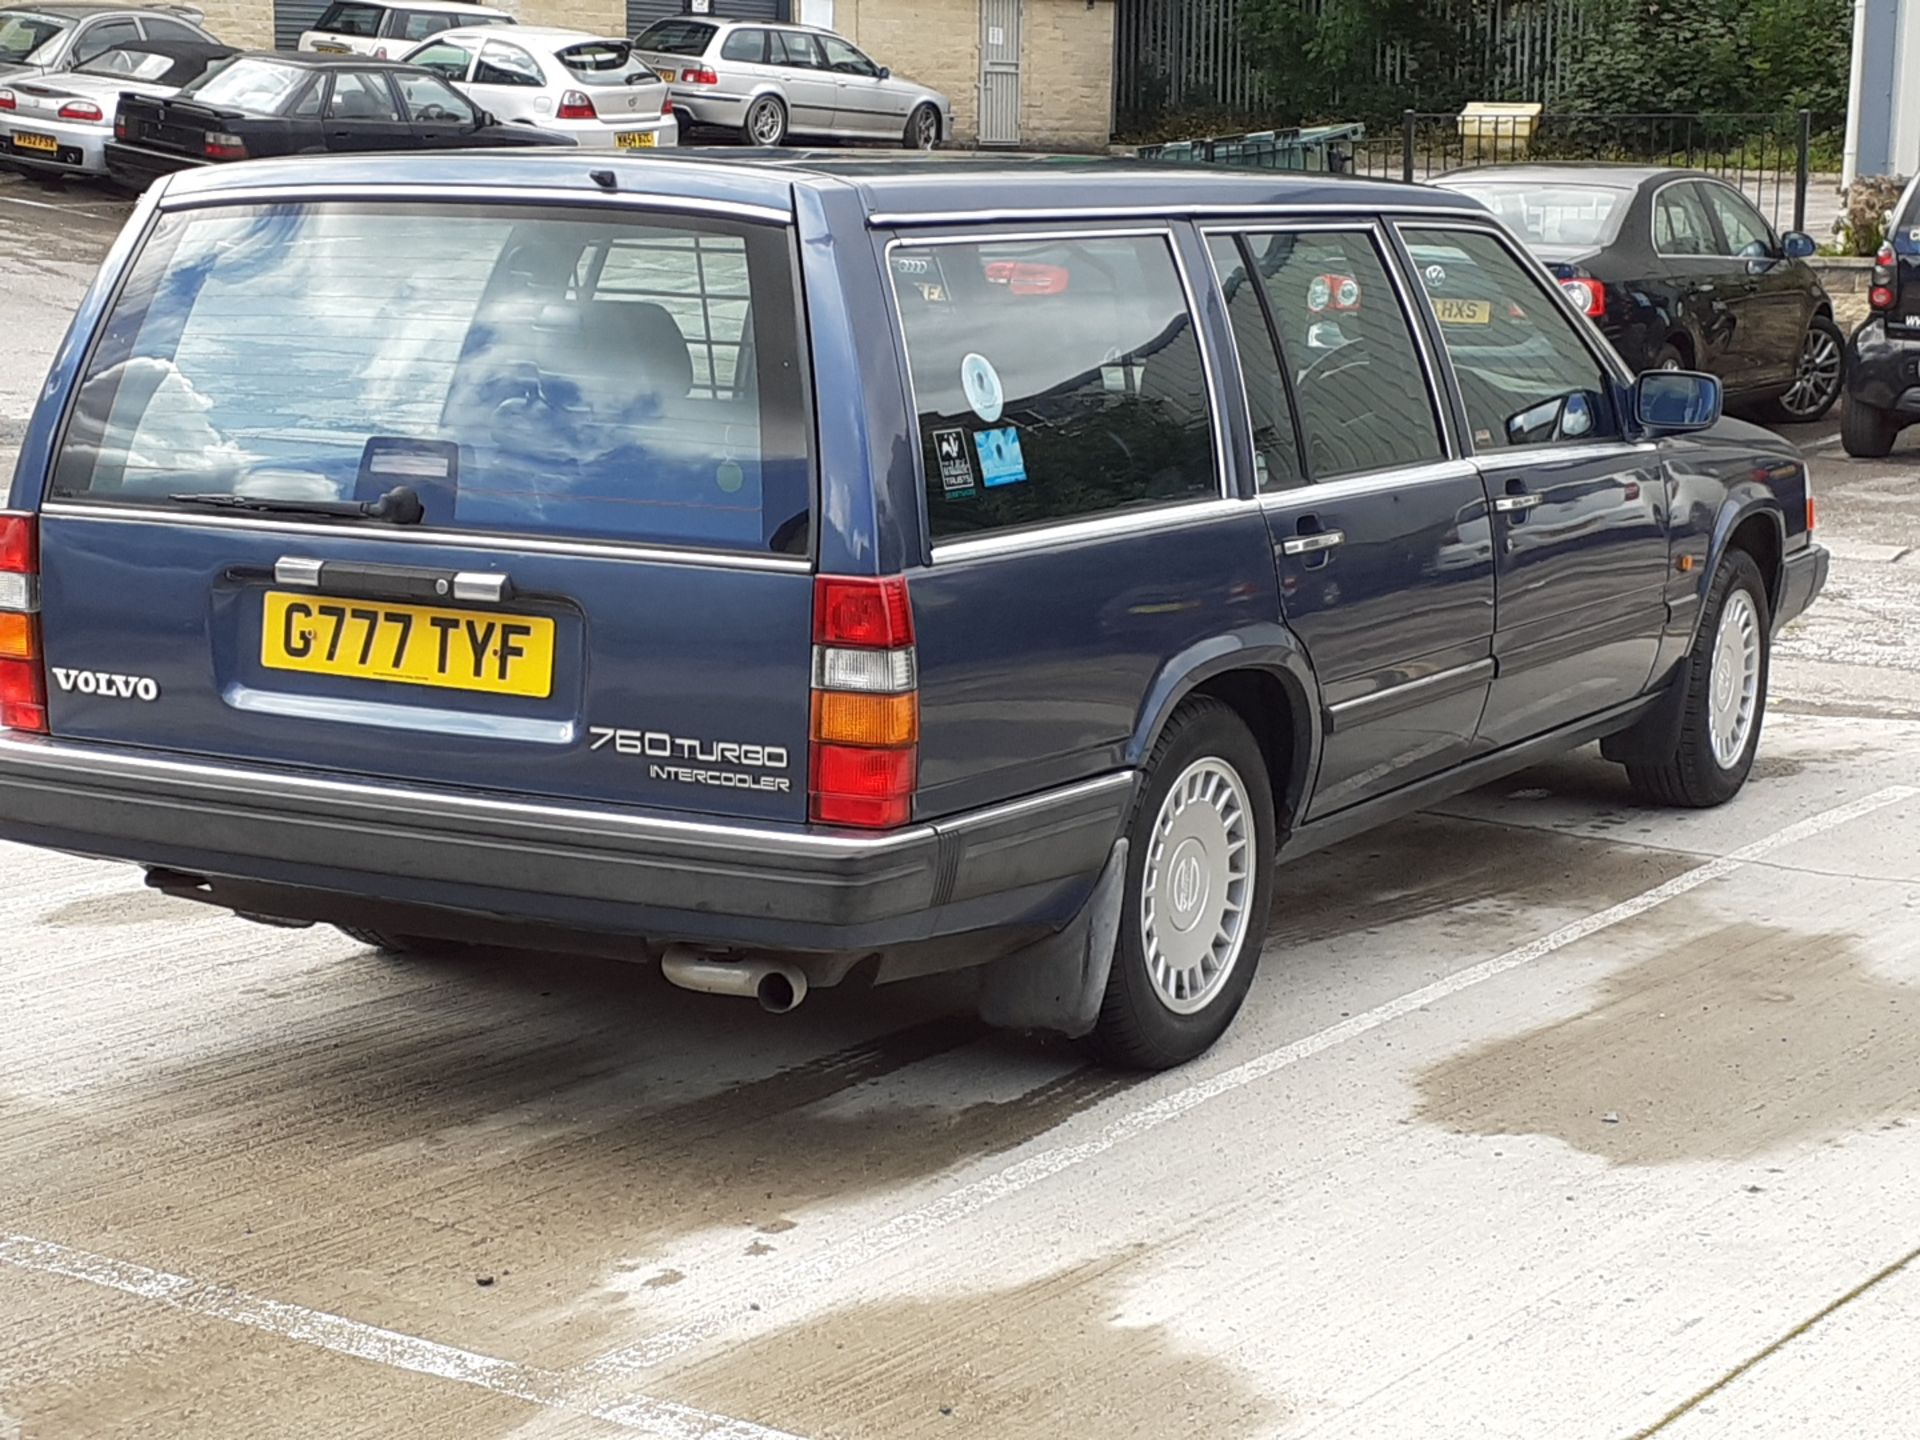 1989/G REG VOLVO 760 TURBO 2.3 PETROL AUTO ESTATE, SHOWING 3 FORMER KEEPERS *NO VAT* - Image 8 of 16